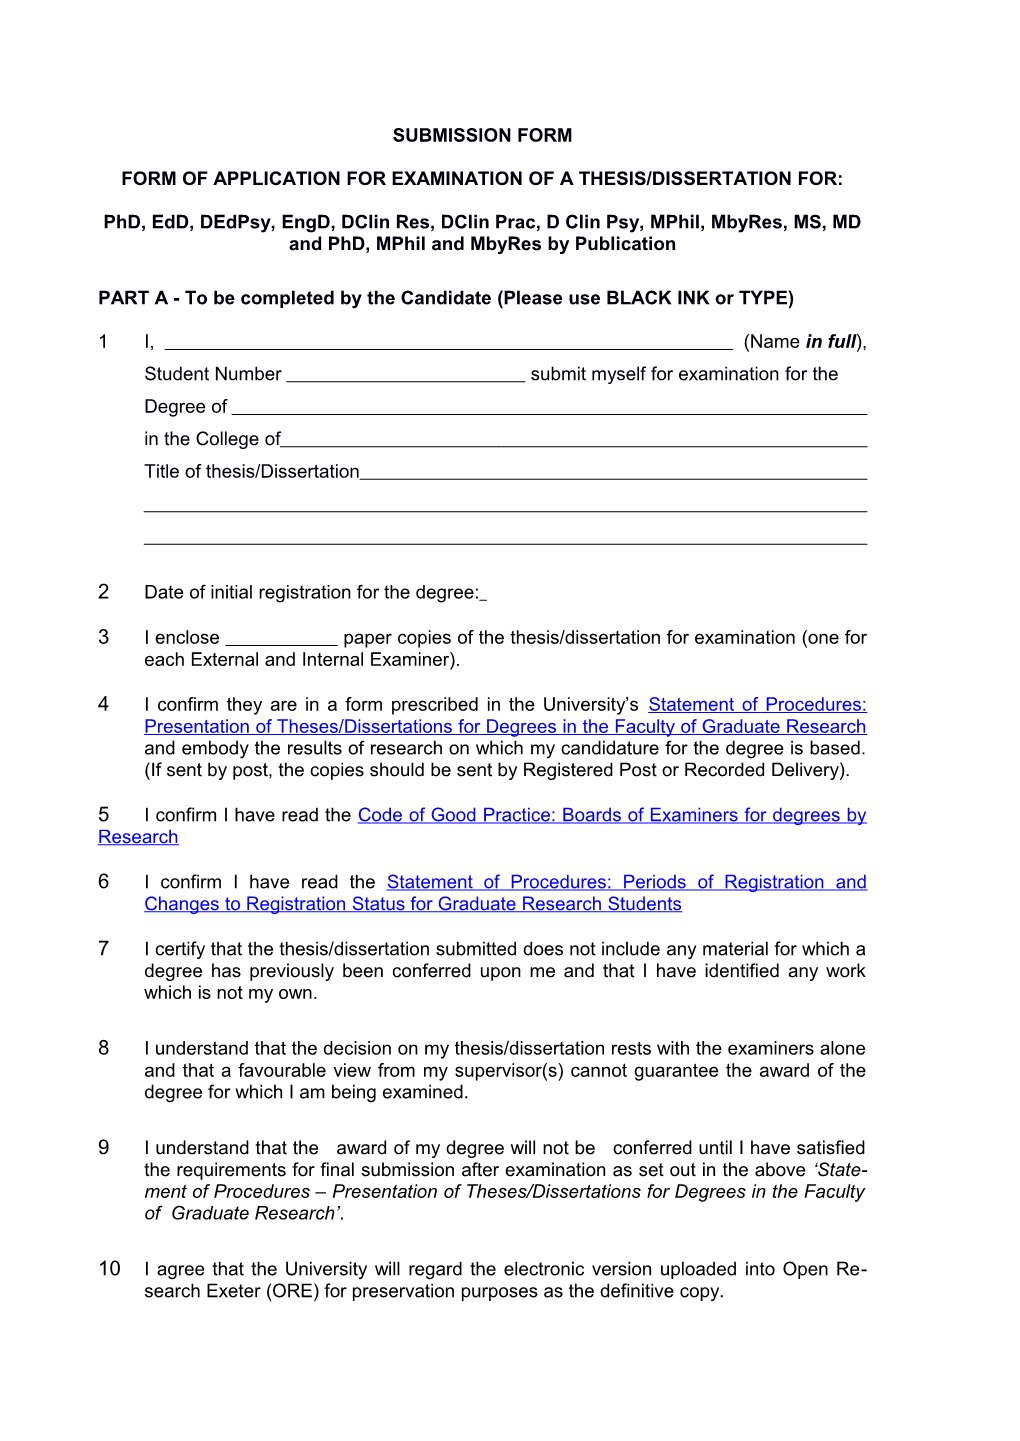 Form of Application for Examination of a Thesis/Dissertation For